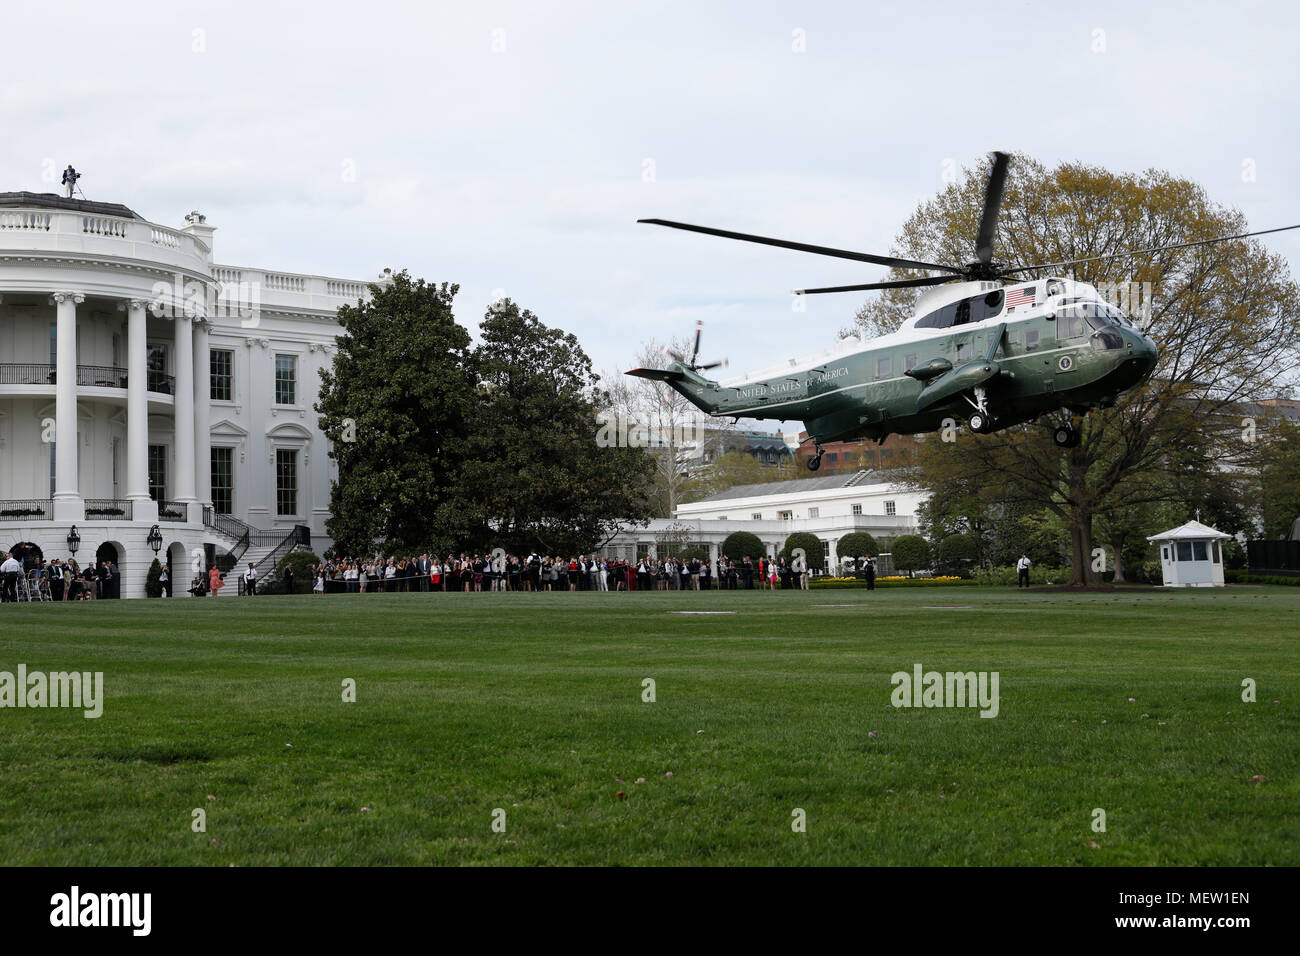 Marine One helicopter with U.S. President Donald Trump, France's president Emmanuel Macron and First Ladies Melania Trump and Brigitte Macron on board departs on the South Lawn of the White House in Washington, DC, U.S., on Monday, April 23, 2018. As Macron arrives for the first state visit of Trump's presidency, the U.S. leader is threatening to upend the global trading system with tariffs on China, maybe Europe too. Credit: Yuri Gripas/Pool via CNP /MediaPunch Stock Photo